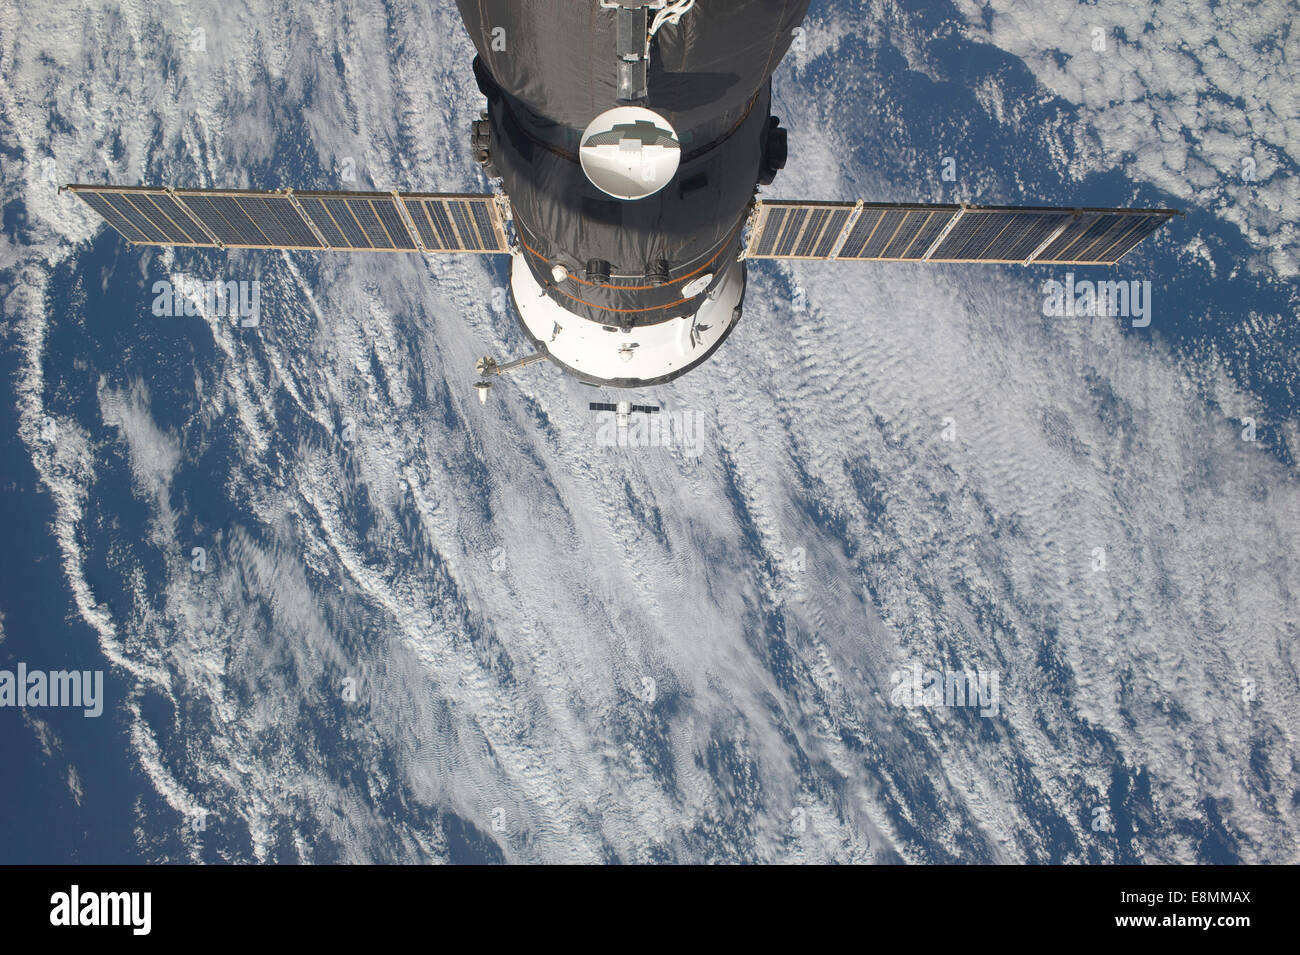 May 25, 2012 - The SpaceX Dragon commercial cargo craft approaches the International Space Station for grapple and berthing. Stock Photo